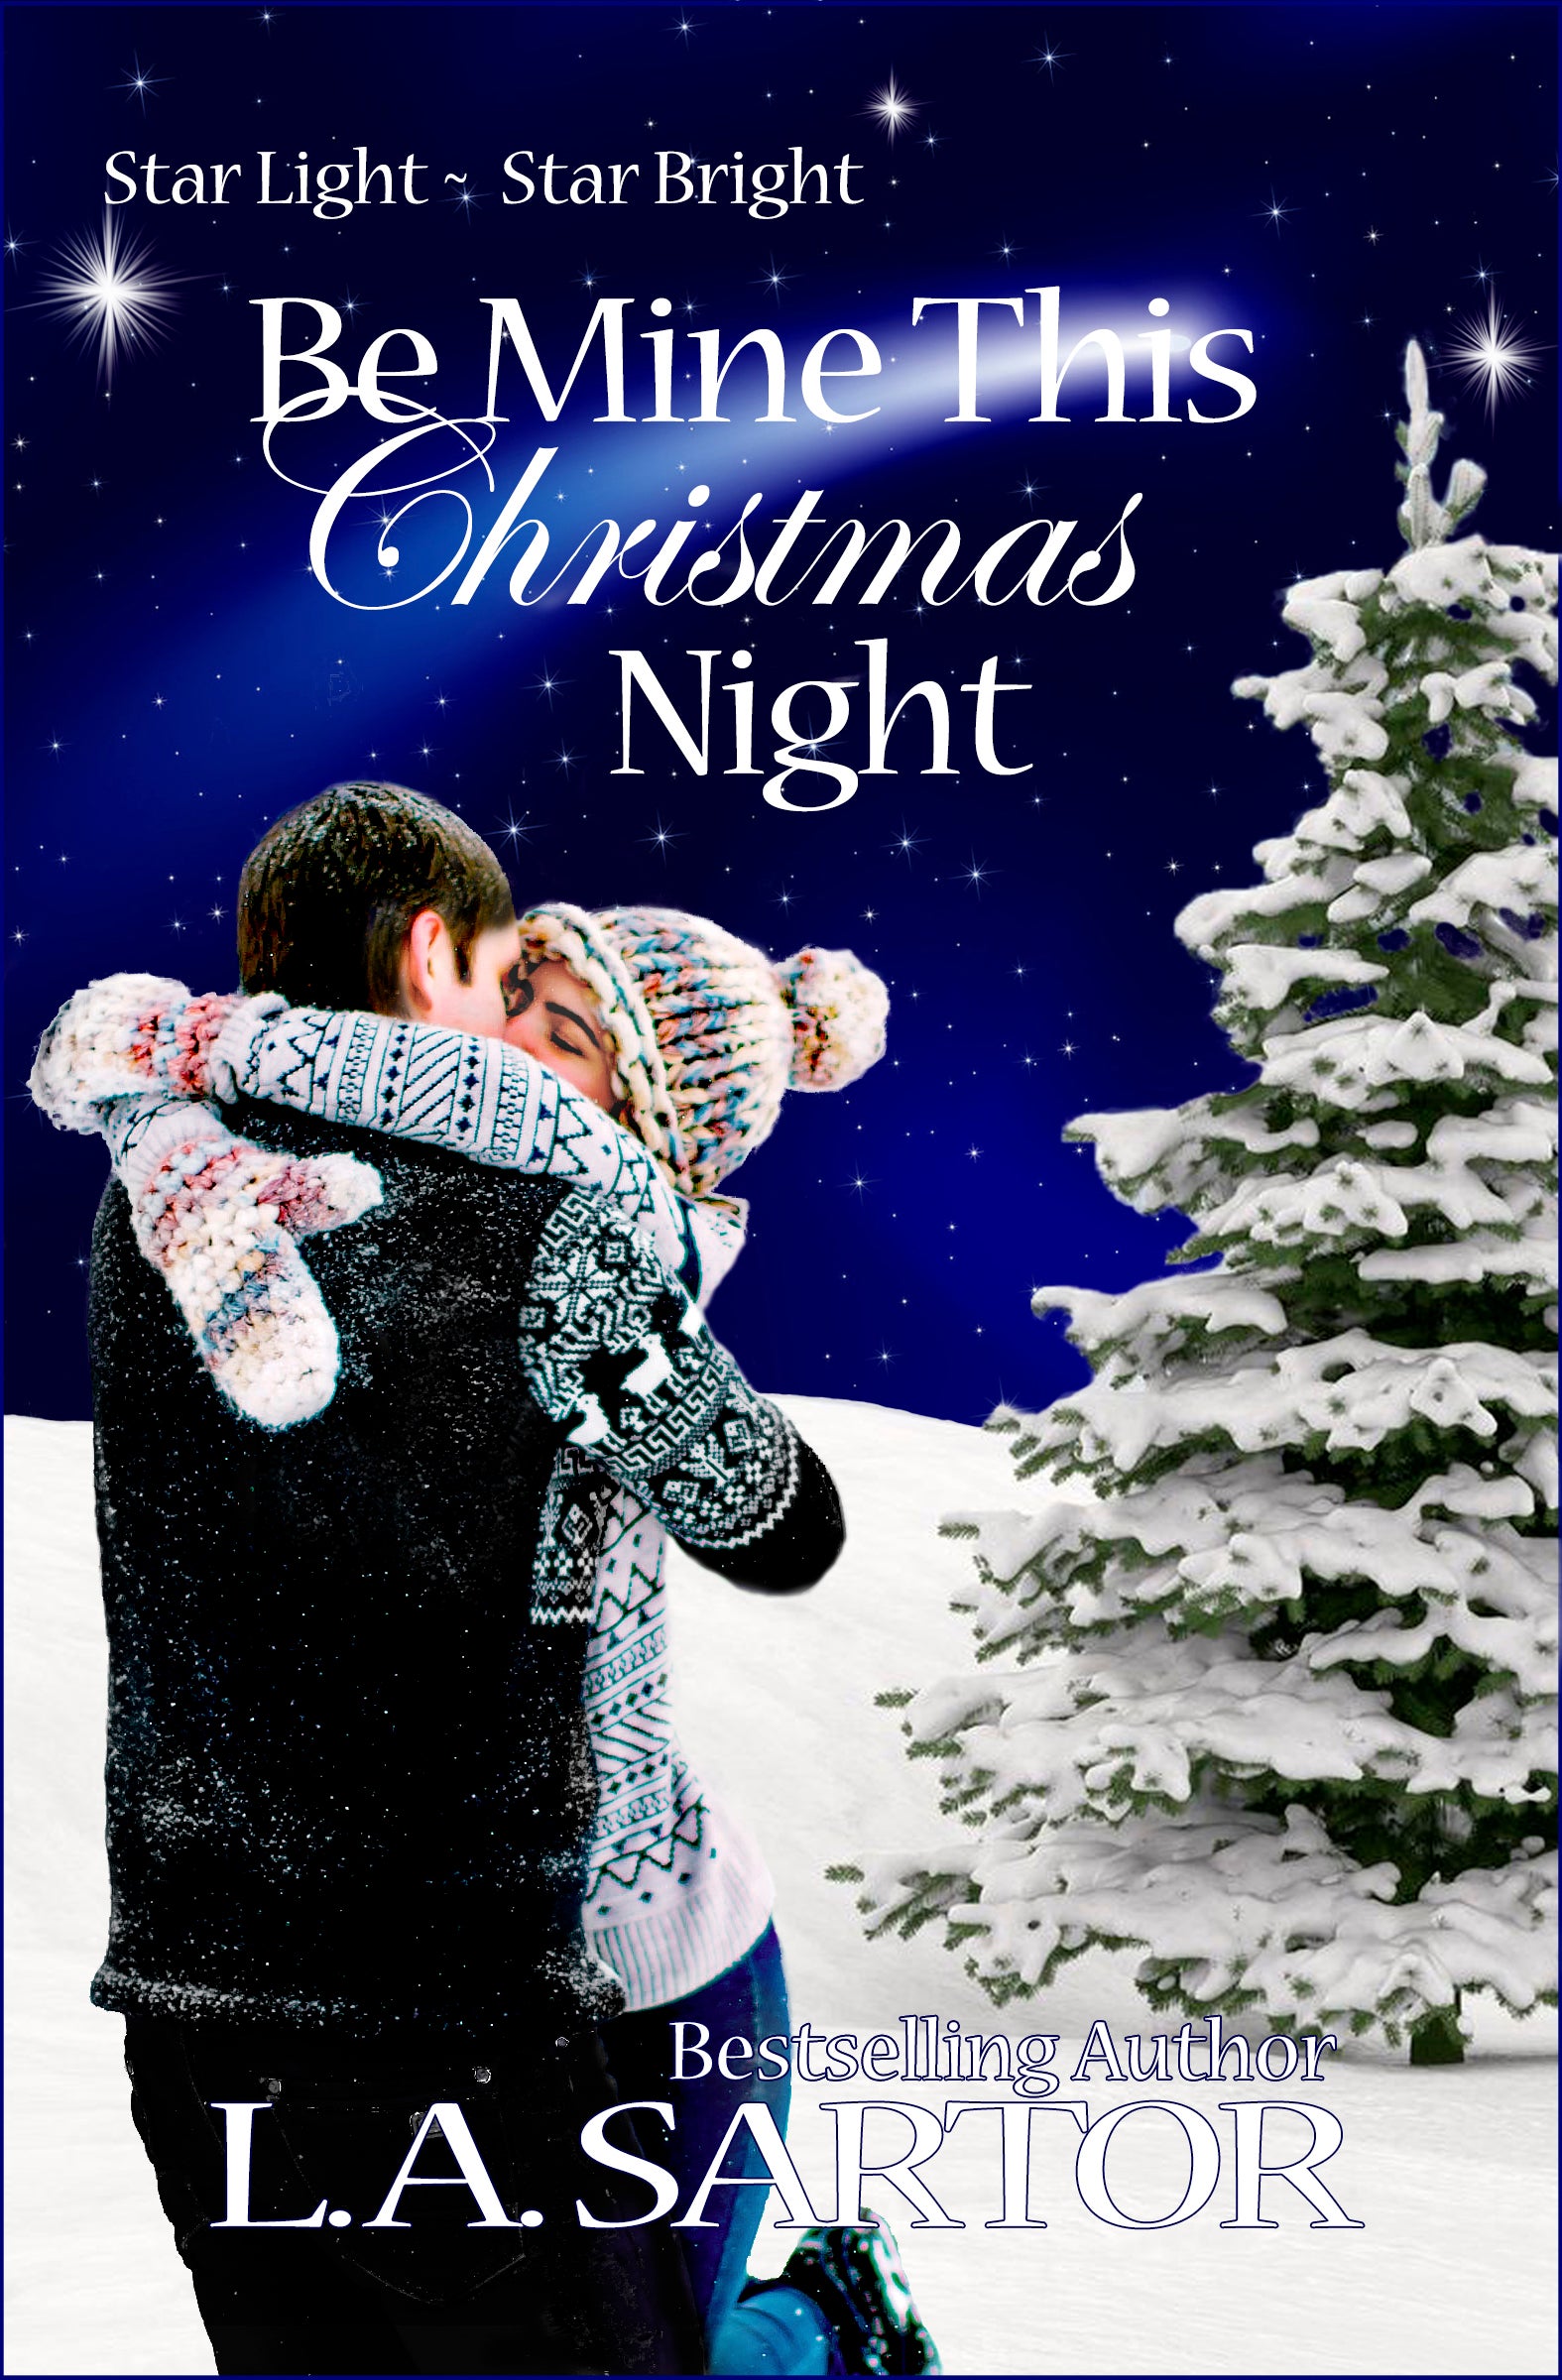 Cover of L.A. Sartor's Christmas Romance Be MIne This Christmas Night with couple in an embarce set in snowy Boulder, Colorado